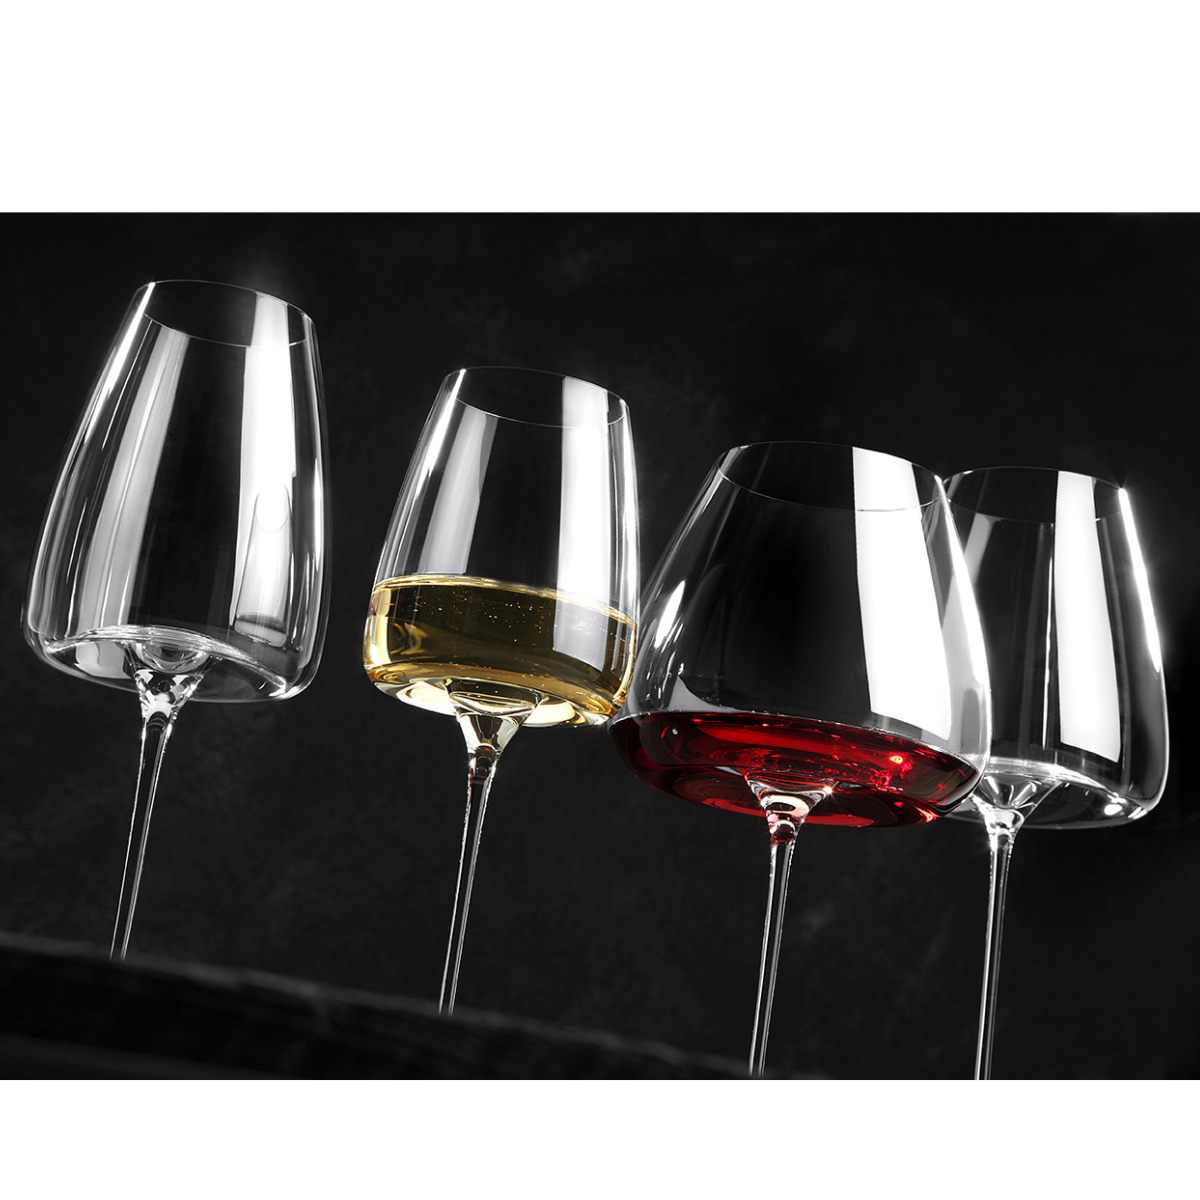 Ziher Vision Rich Wine Glass in Set with 2 Glasses Pack Lead-free crystal made in Hungary